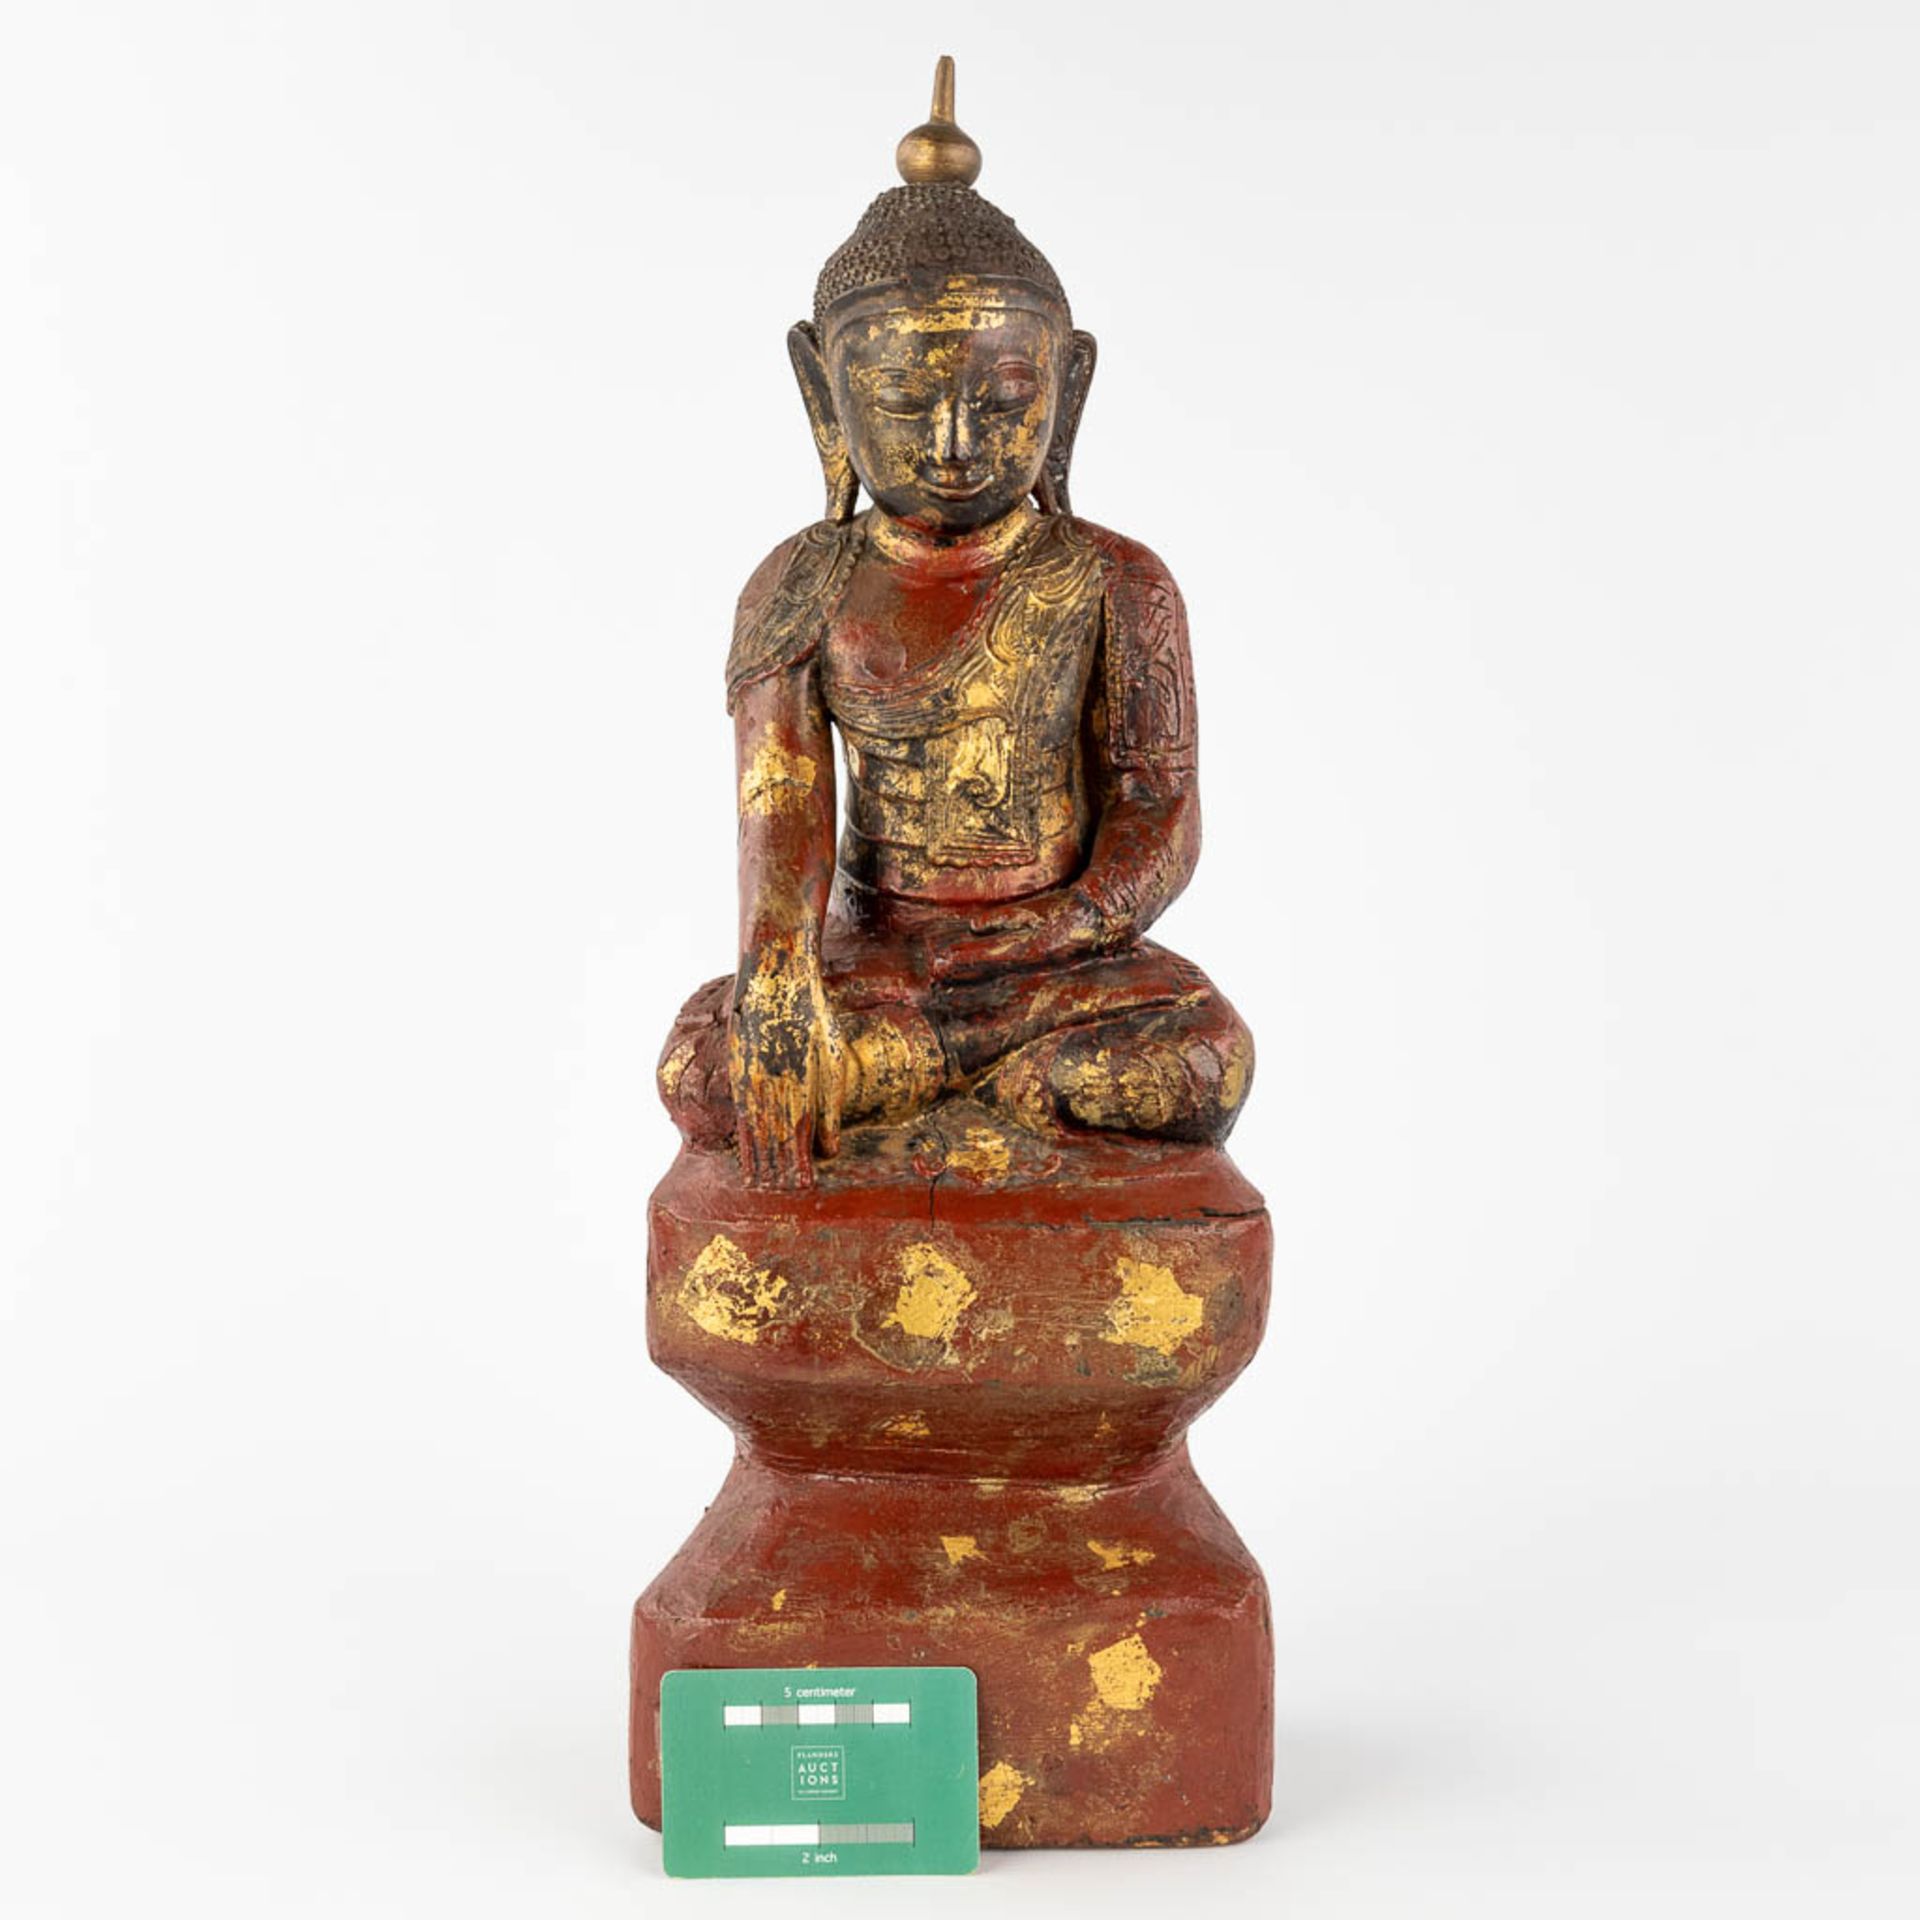 A collection of two wood-sculptured buddha statues, 19th/20th C. (W: 29 x H: 60 cm) - Image 13 of 27